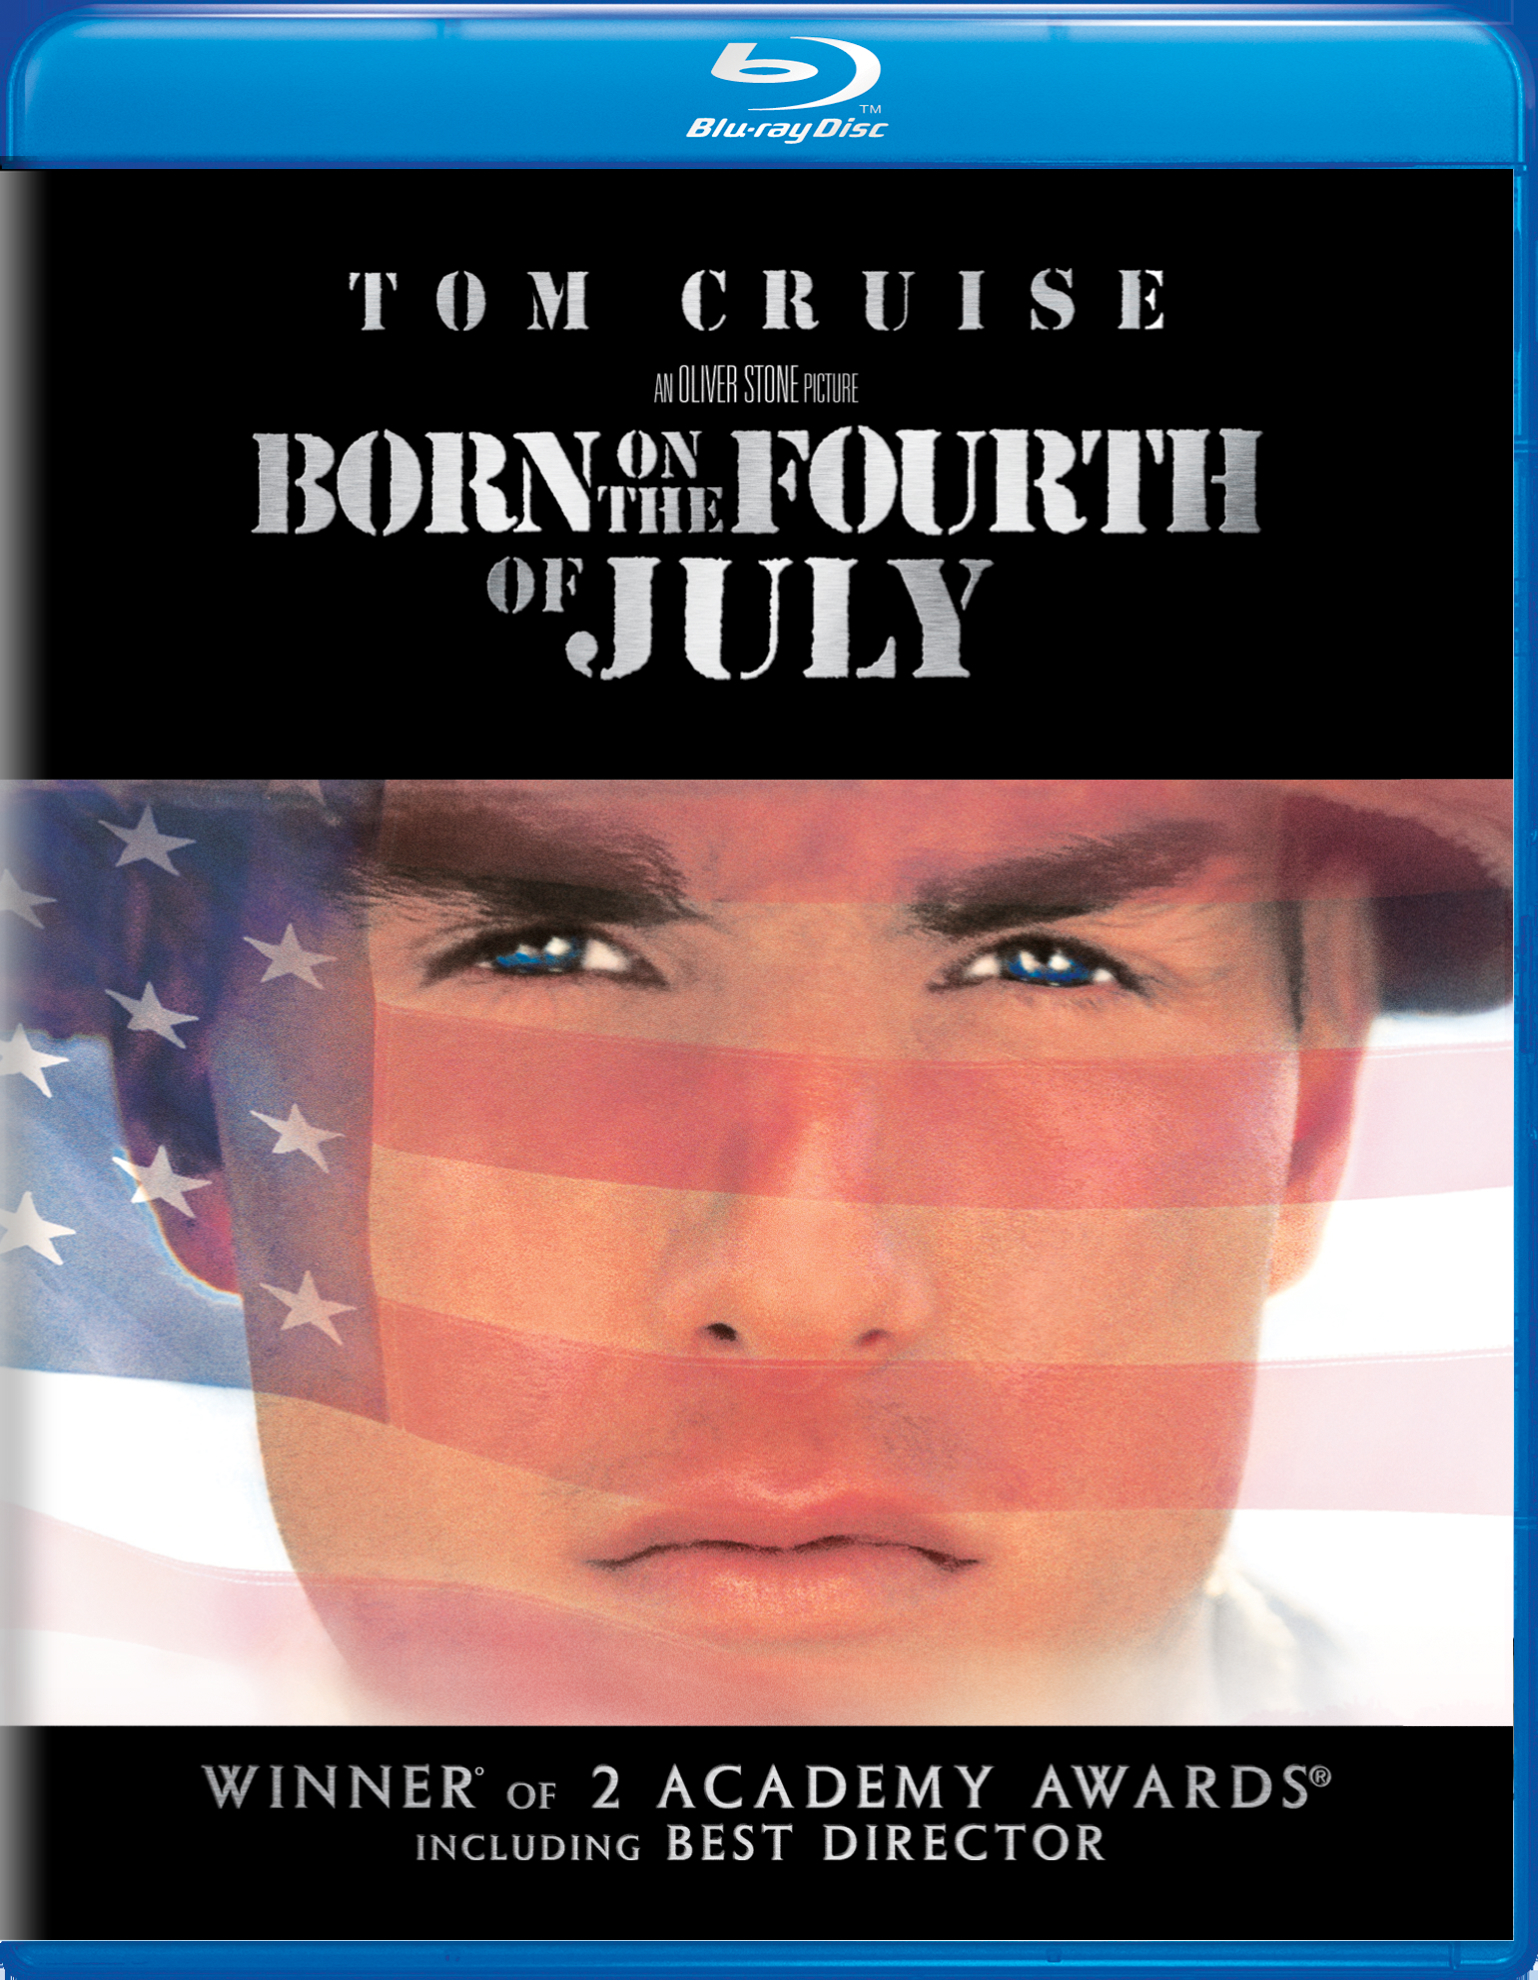 Born On The Fourth Of July (Blu-ray New Box Art) - Blu-ray [ 1989 ]  - War Movies On Blu-ray - Movies On GRUV